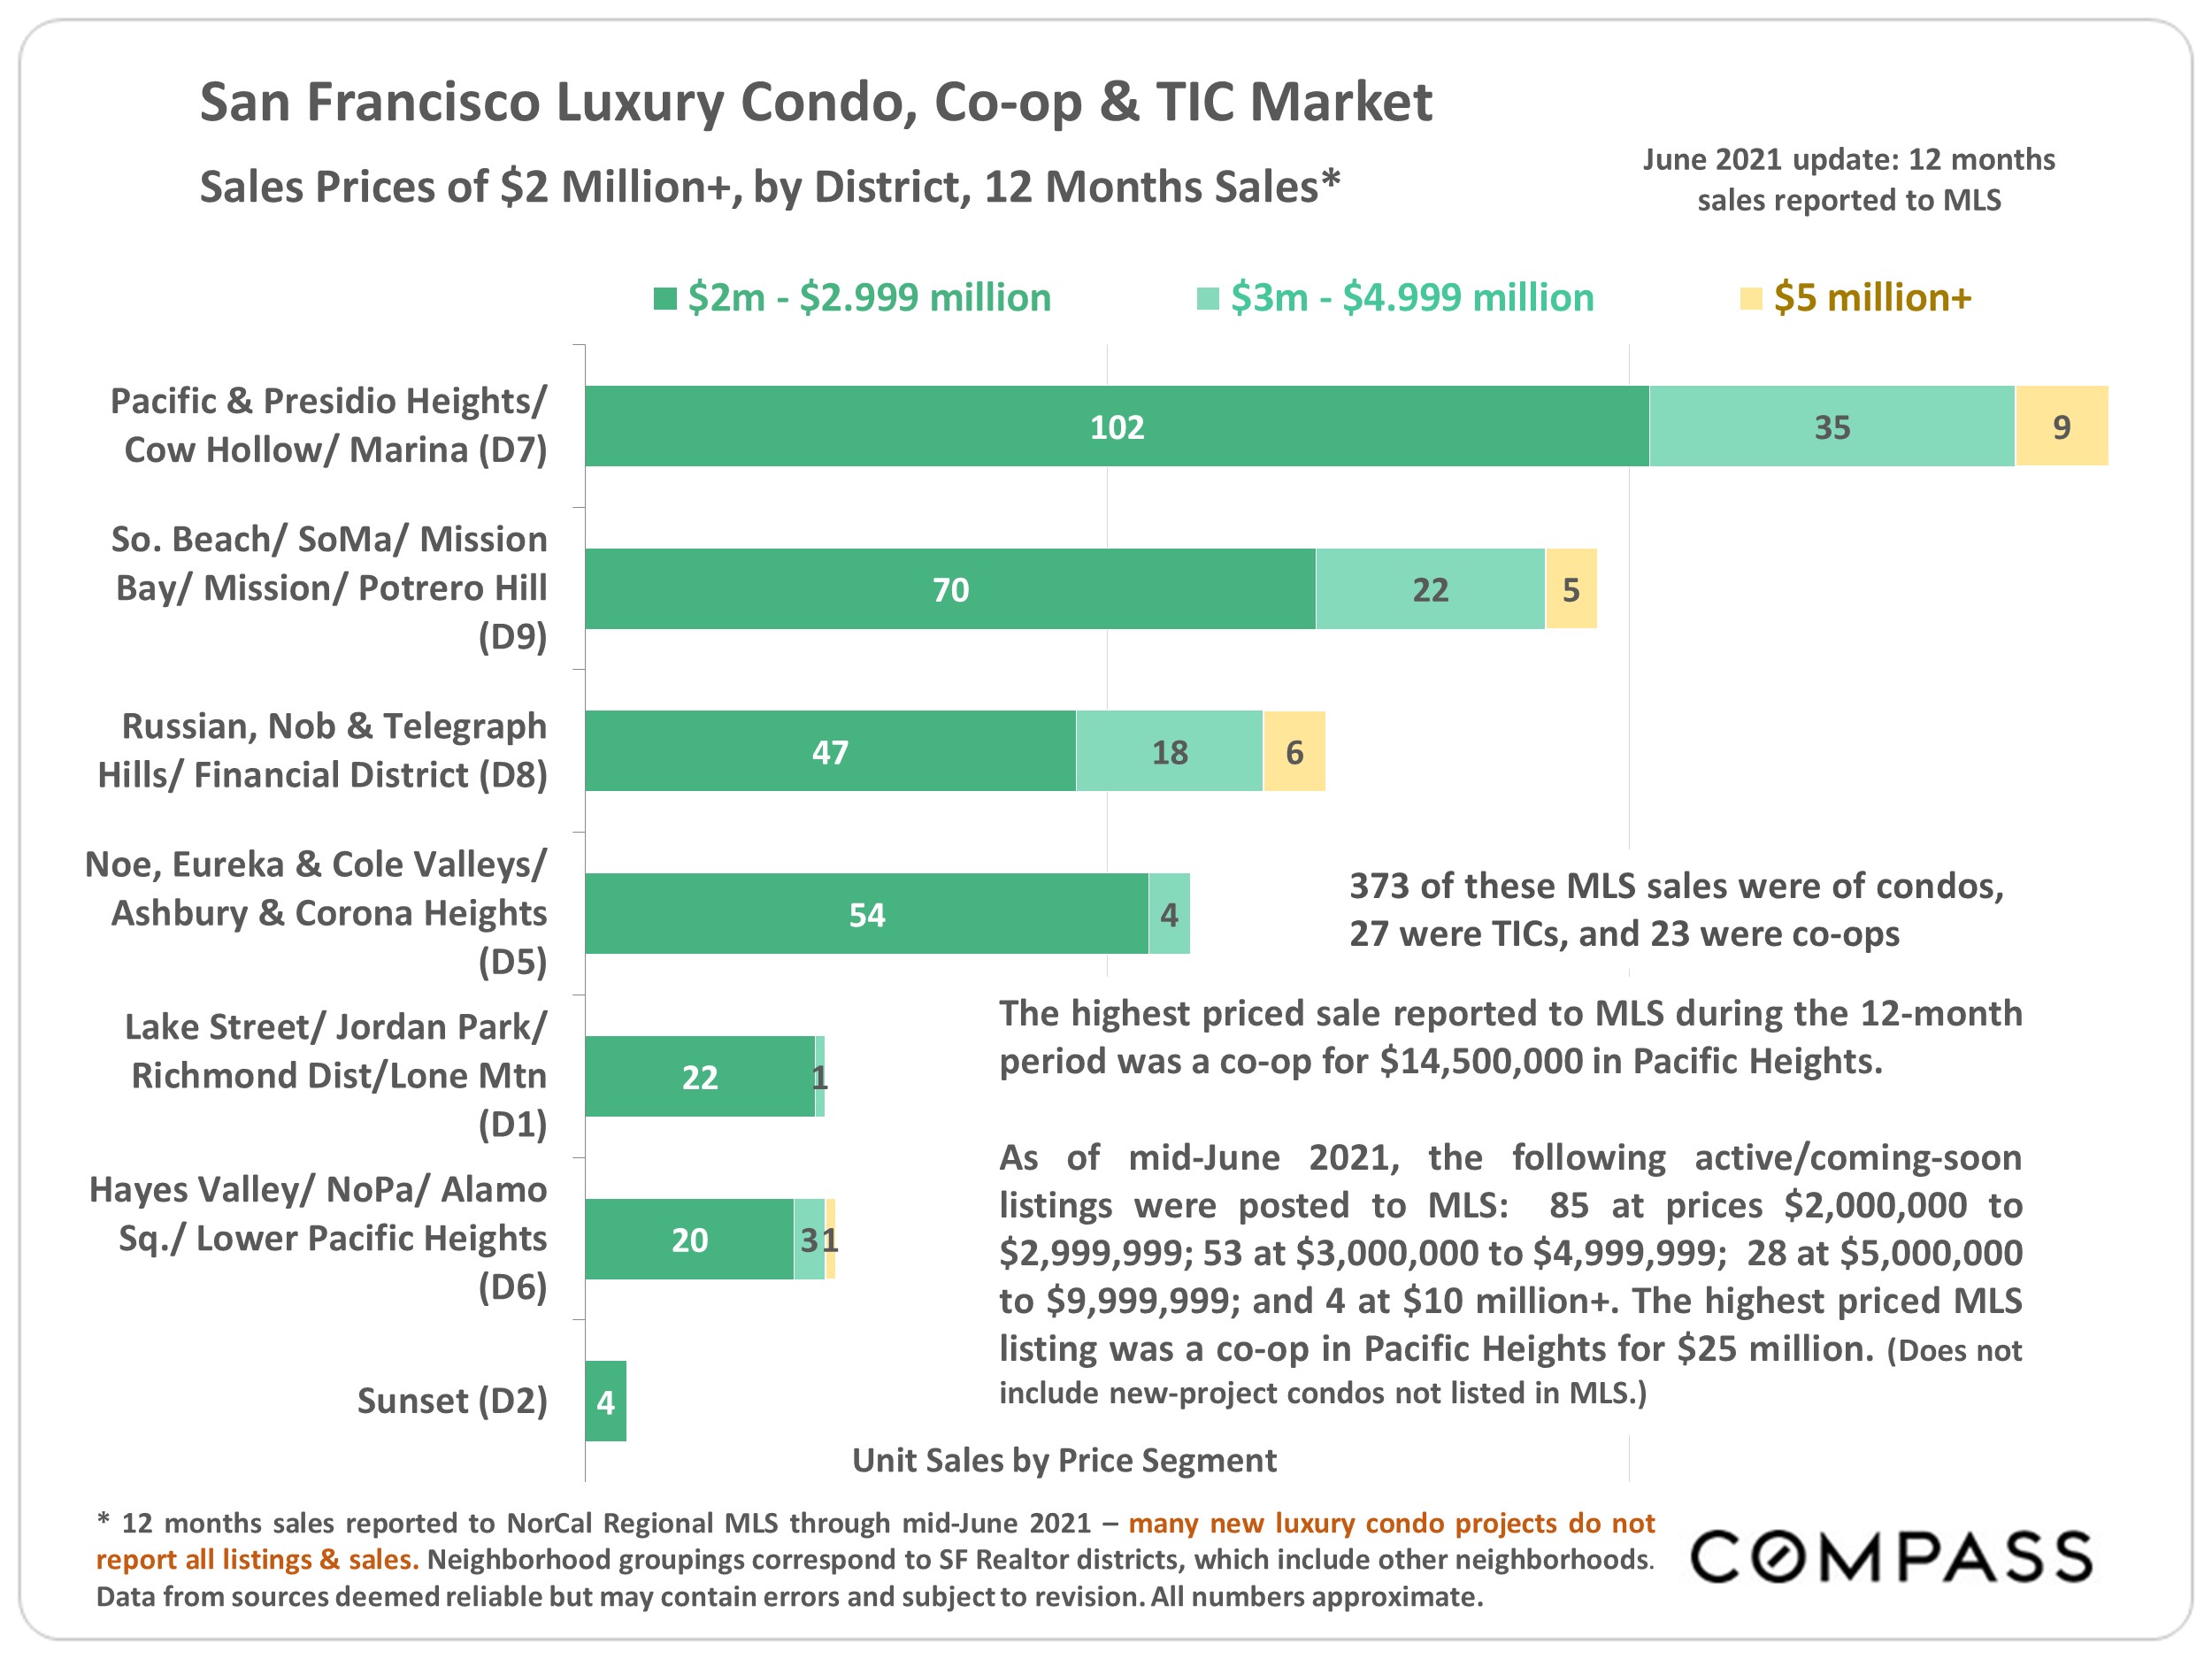 Graph showing San Francisco Luxury Condo, Co-op and TIC Market with Sales Price of $2M+, by district, 12 months sales until Jun 2021